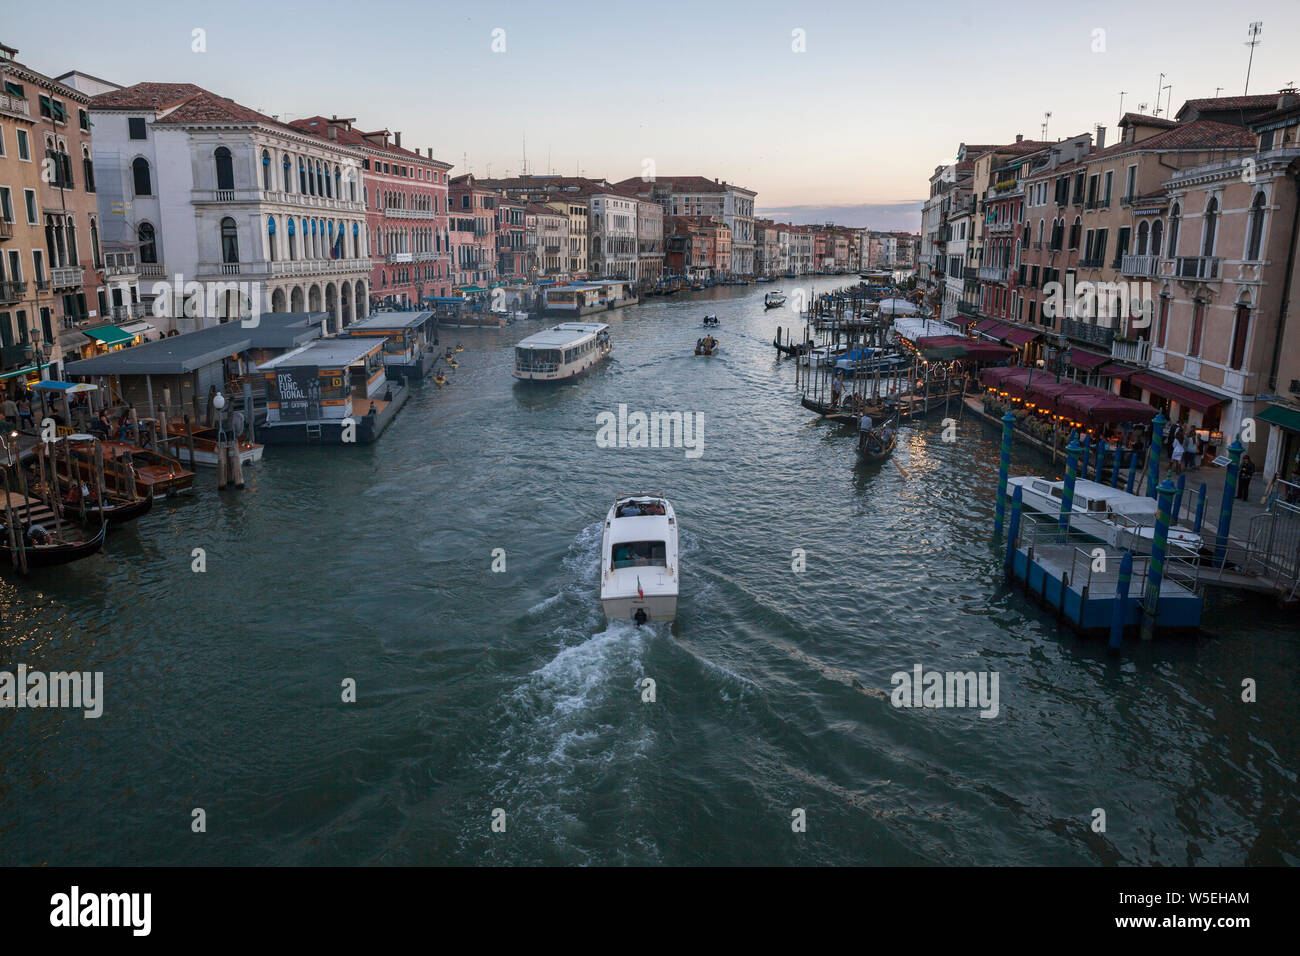 Busy boat traffic and crowded tourism In beautiful ancient city of Venice in Italy. Stock Photo